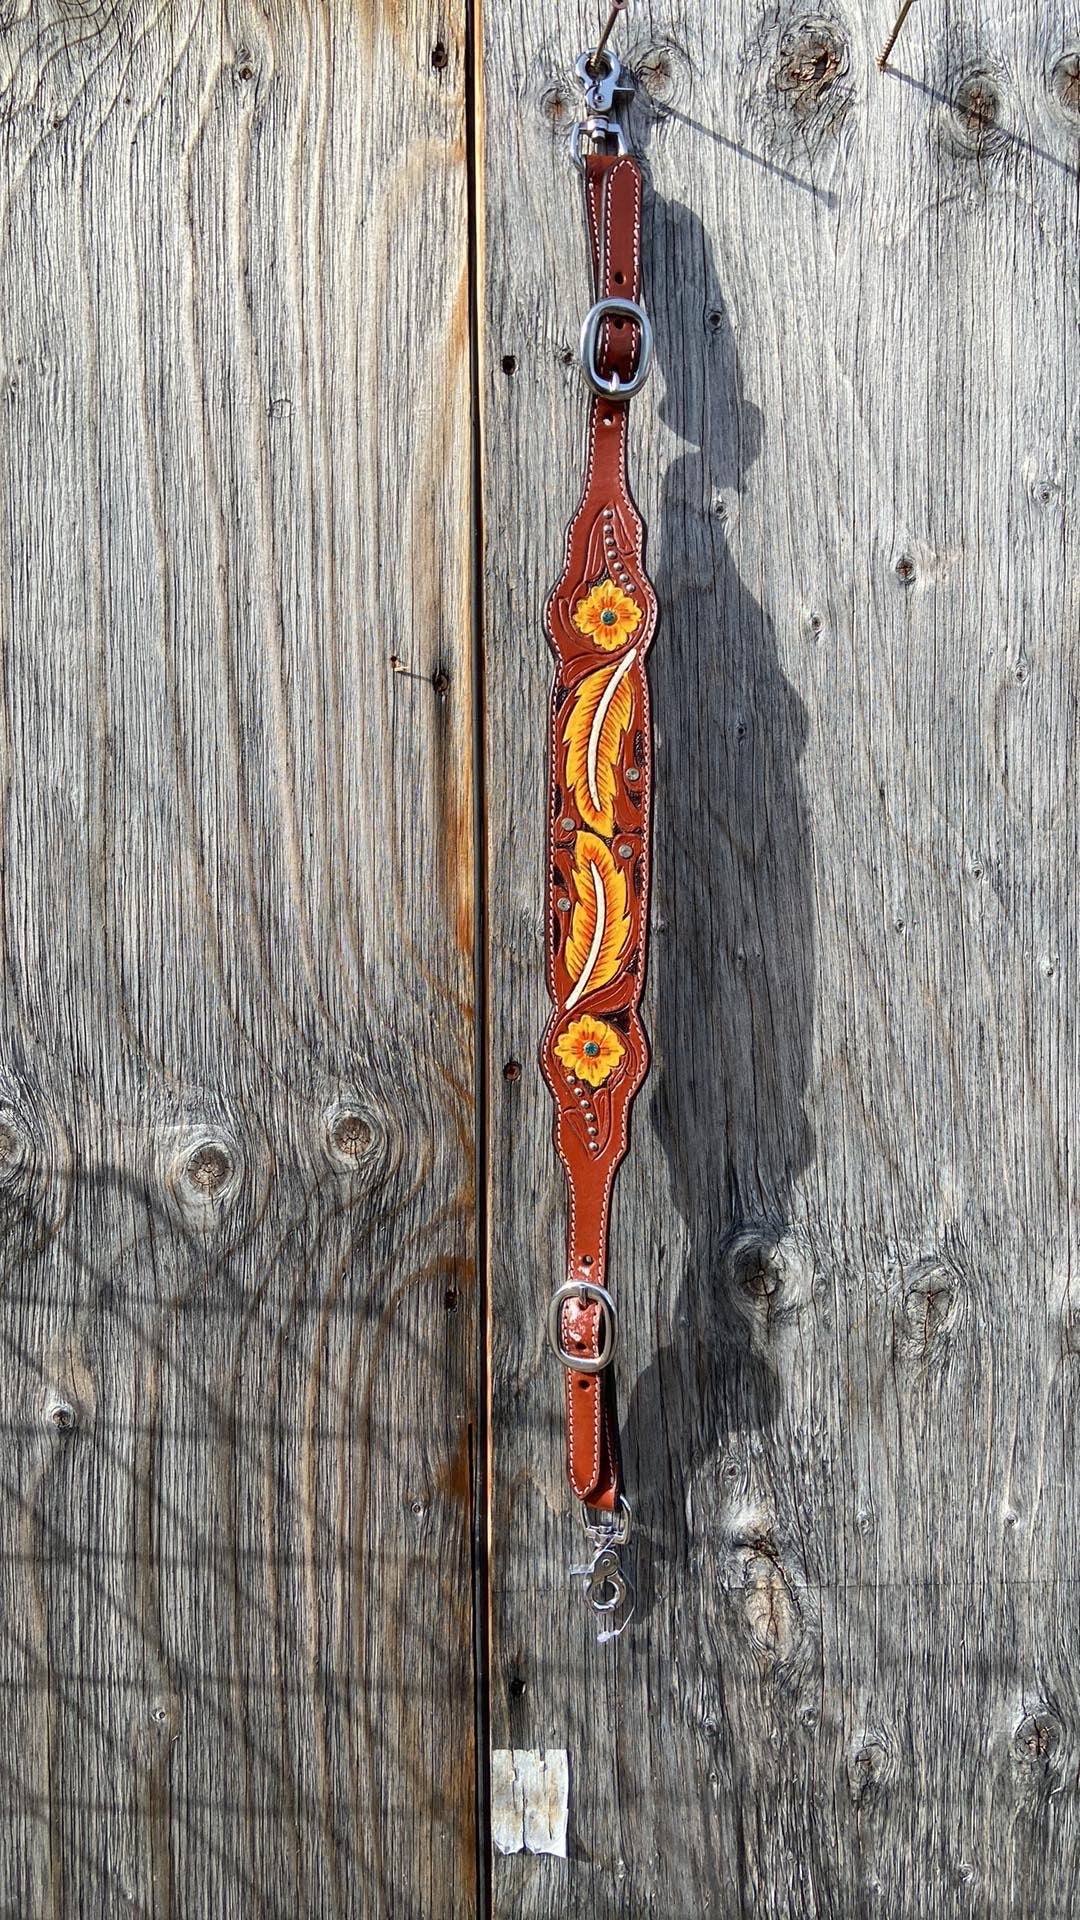 Orange feather wither strap